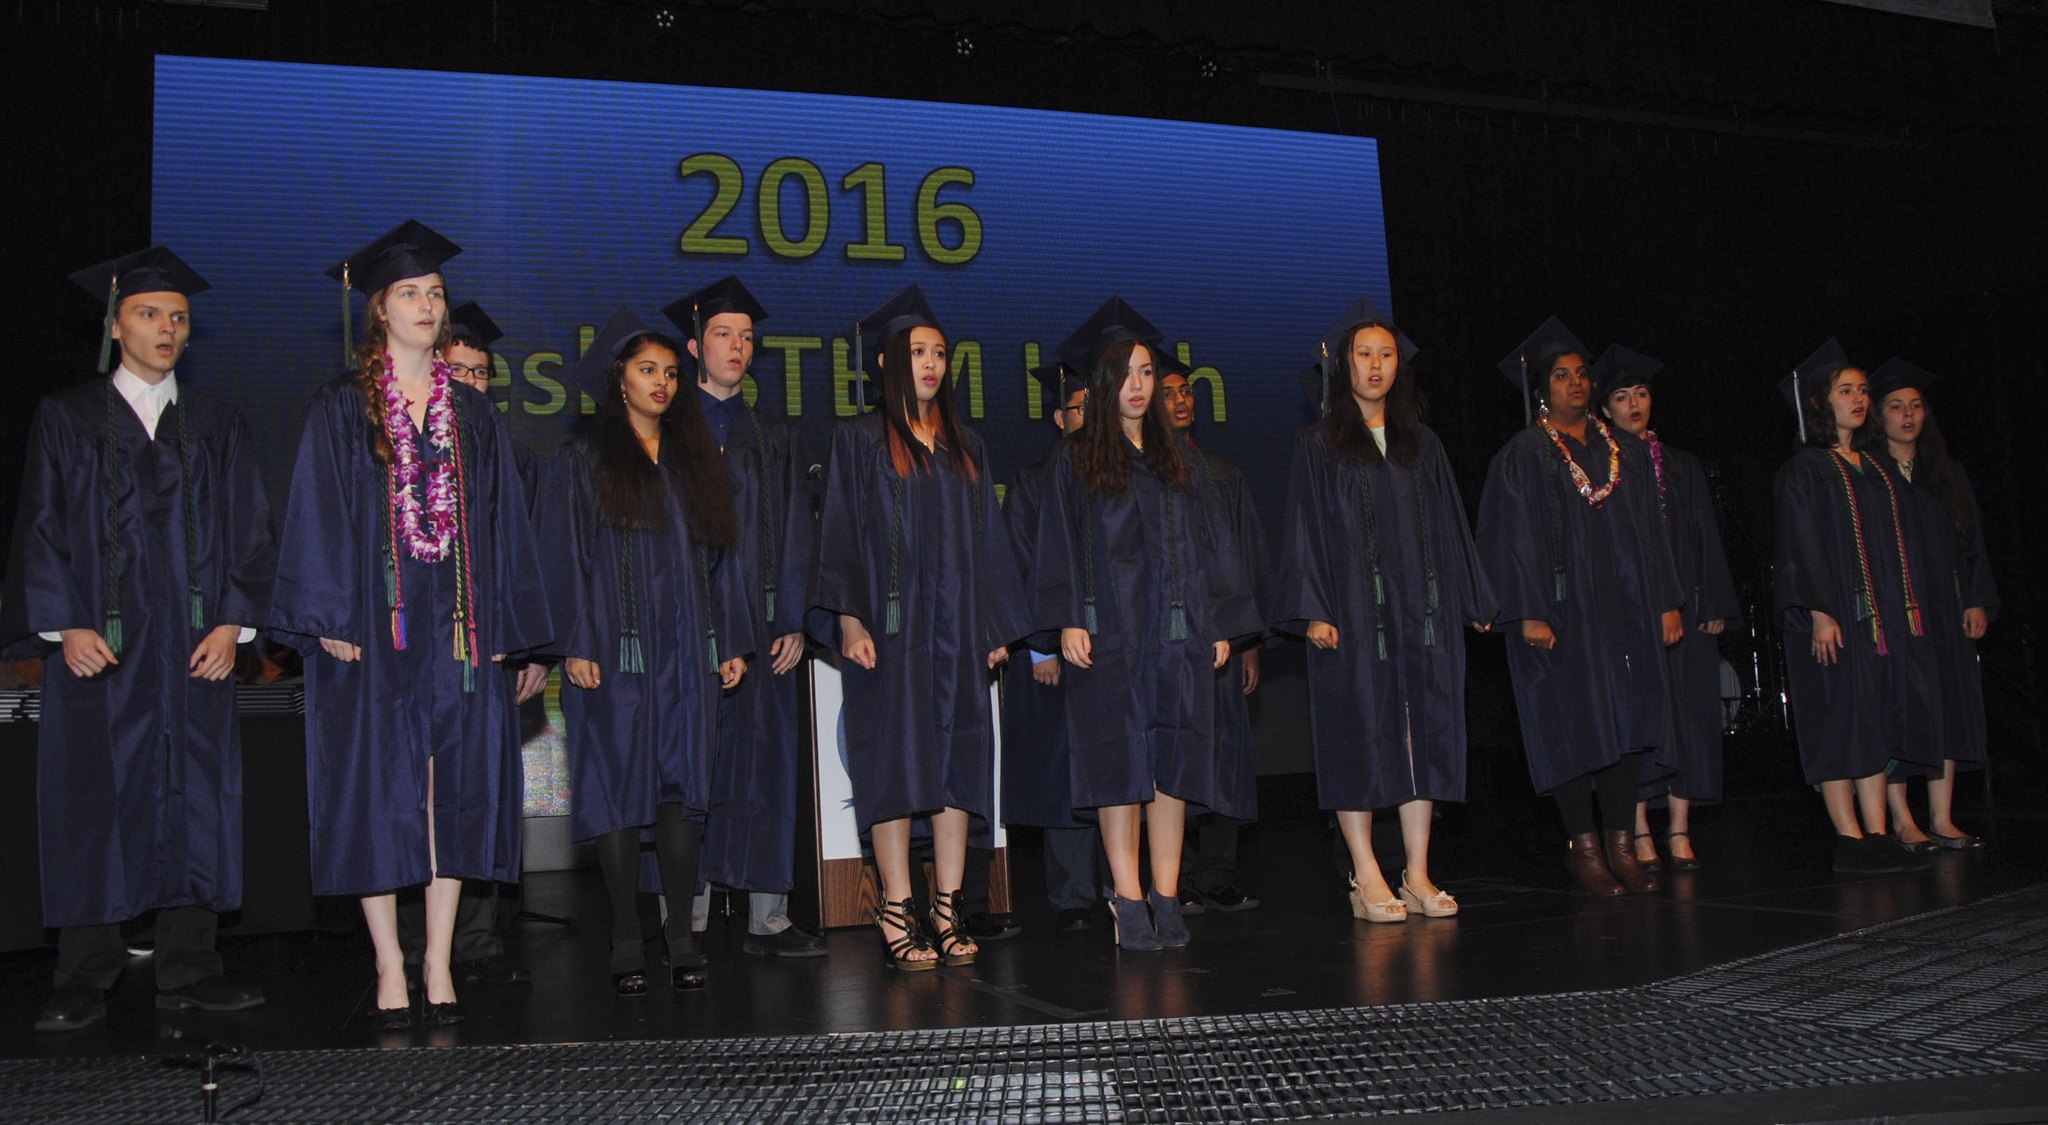 Tesla STEM High School graduates take the stage during their commencement. Courtesy of gradimages.com